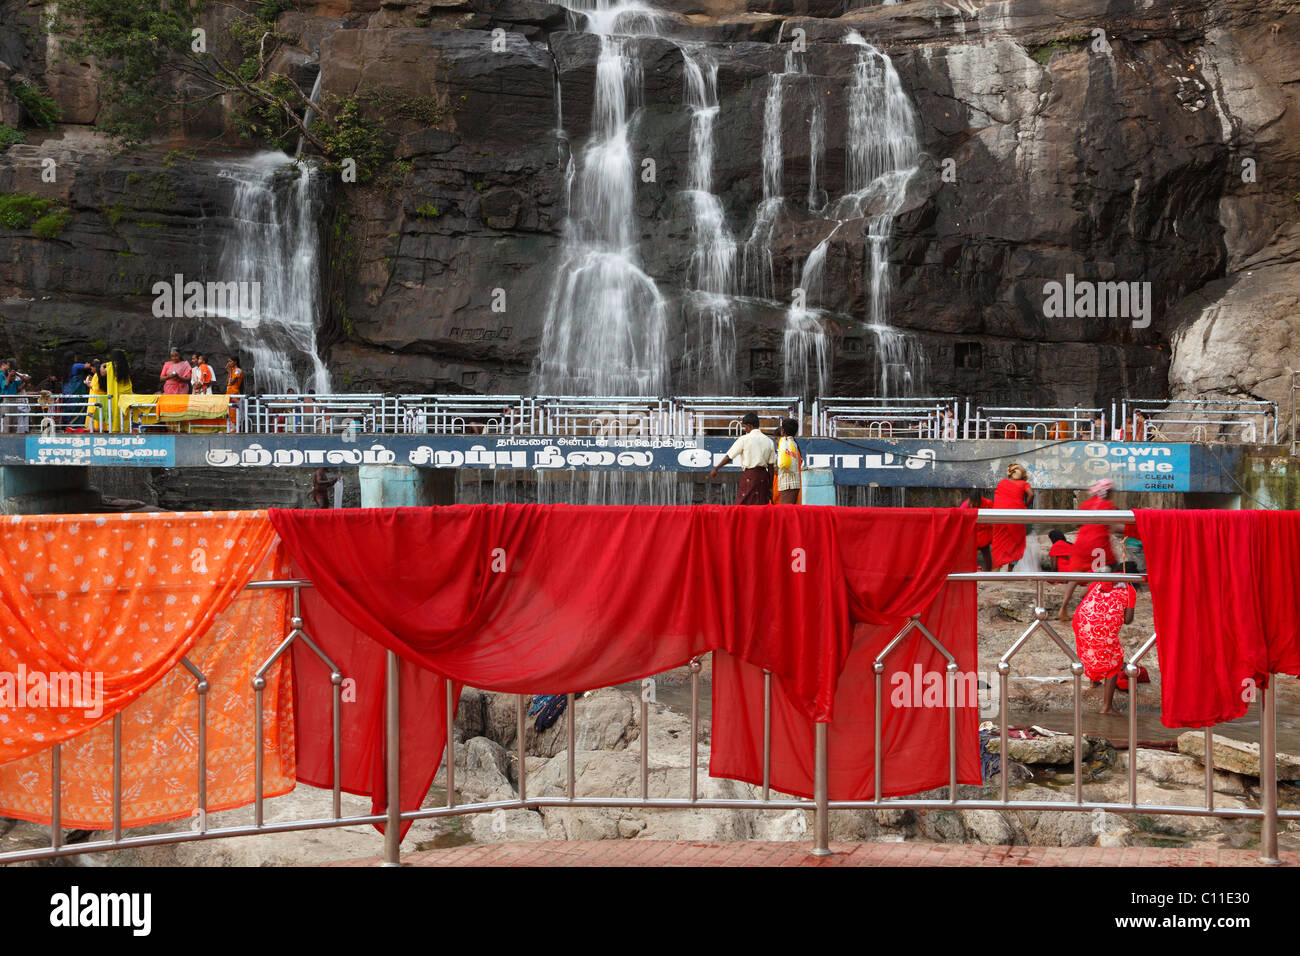 Red cloths hanging out to dry on a railing, Kutralam waterfalls, Peraruvi, Main Falls, Kuttralam, Kuttalam, Courtallam Stock Photo